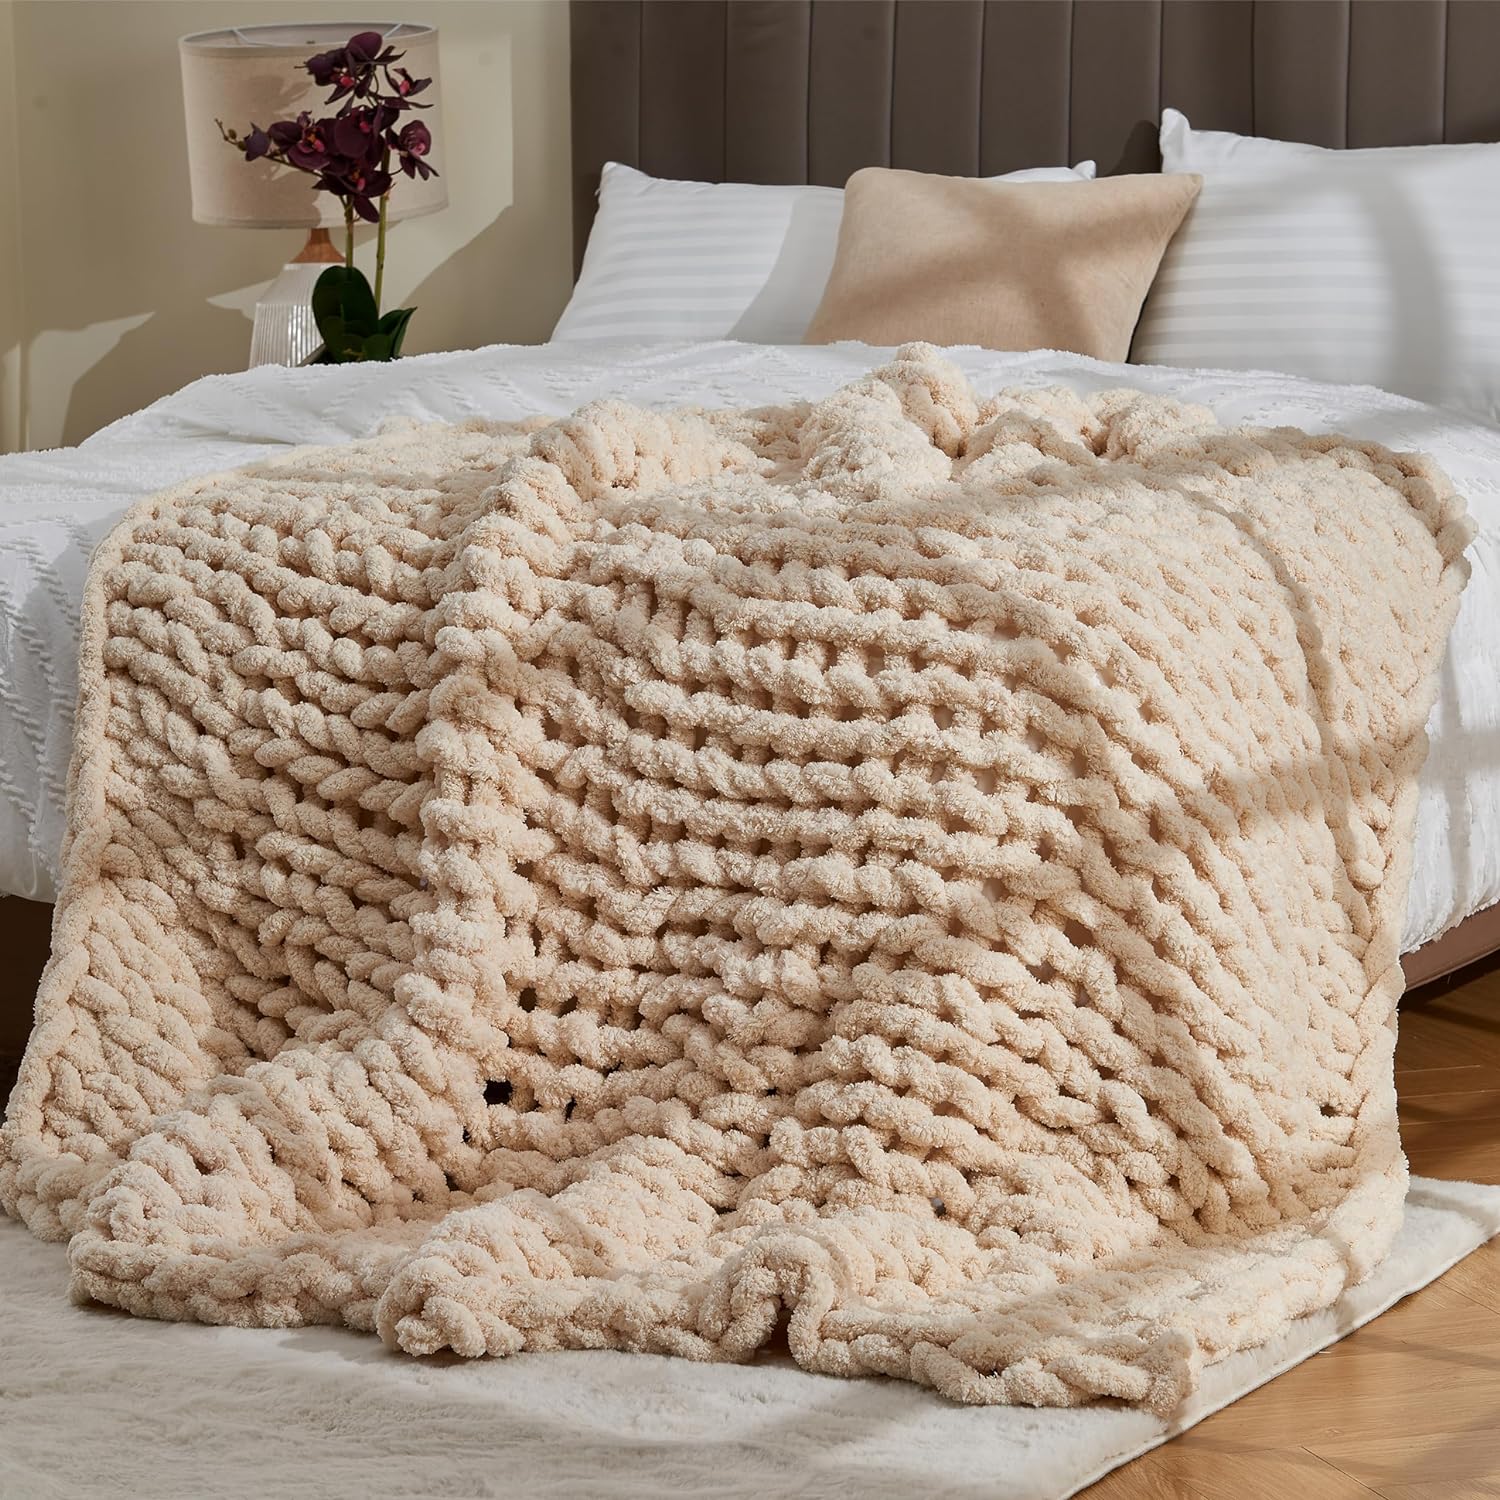 Great Choice Products Chunky Knit Soft Throw Blanket - Cream - Chunky Chenille Cable Knitted Fluffy & Warm Chunky Throw Blanket With Woven Bag?